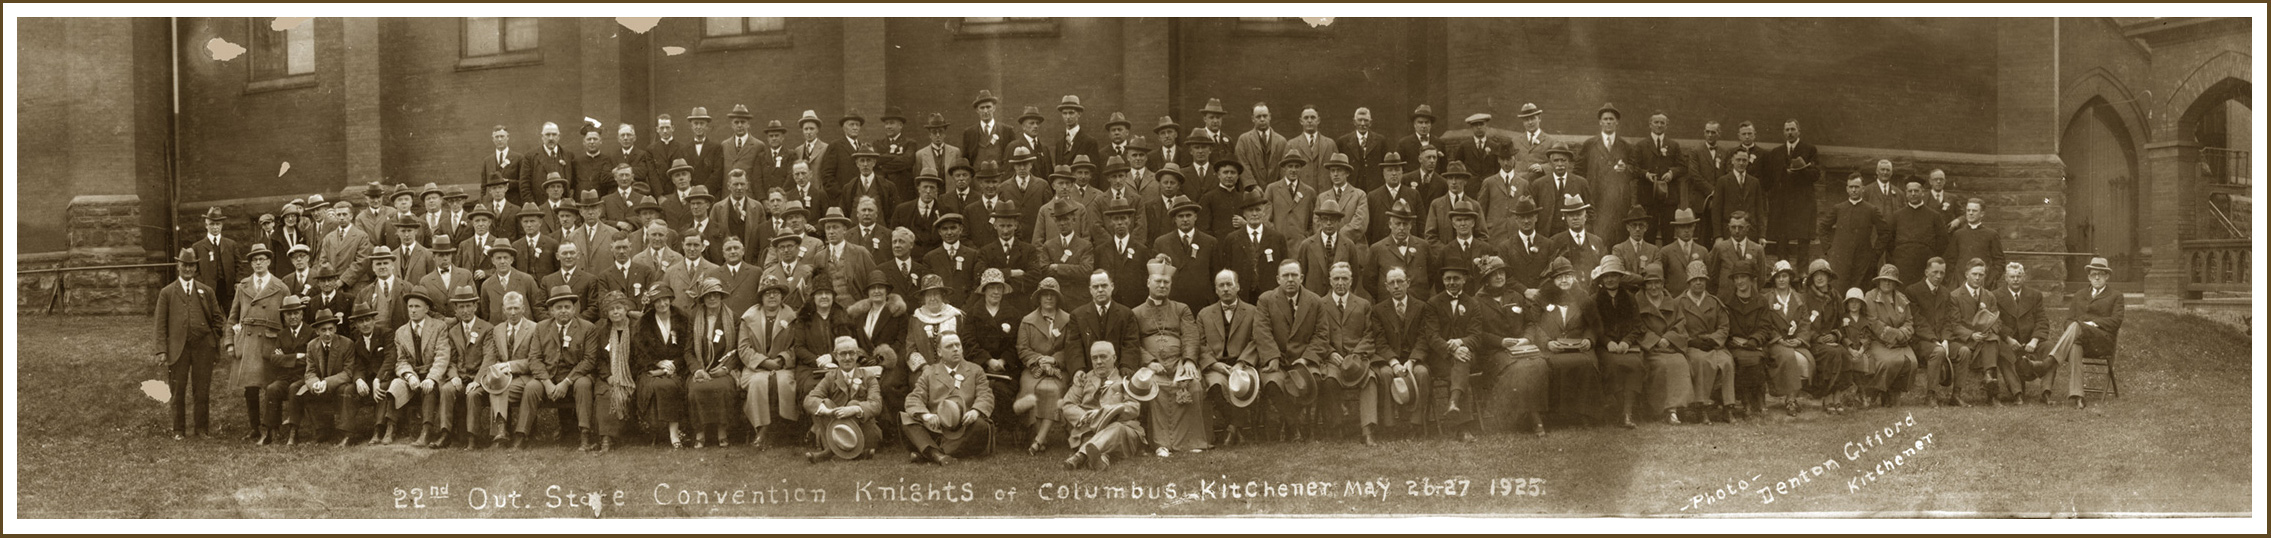 22nd Annual State Convention, Kitchener 1925